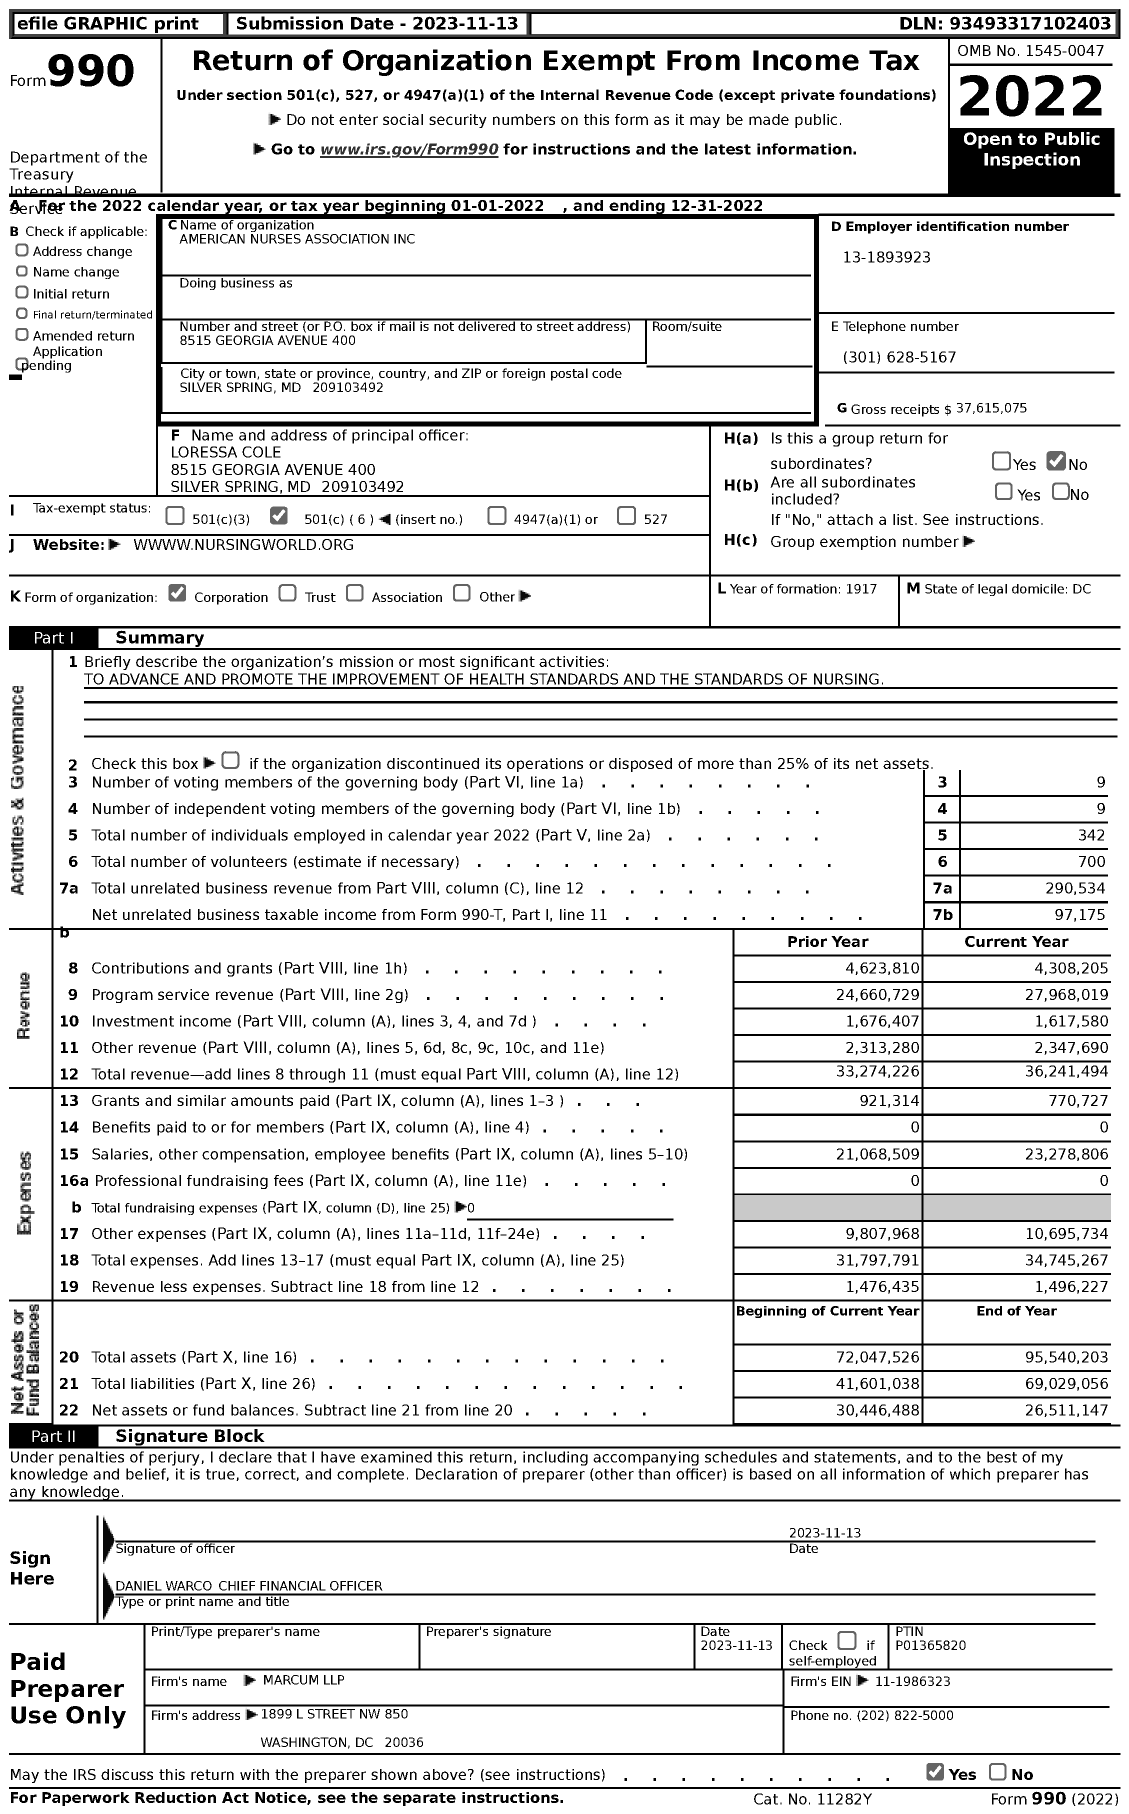 Image of first page of 2022 Form 990 for American Nurses Association (ANA)